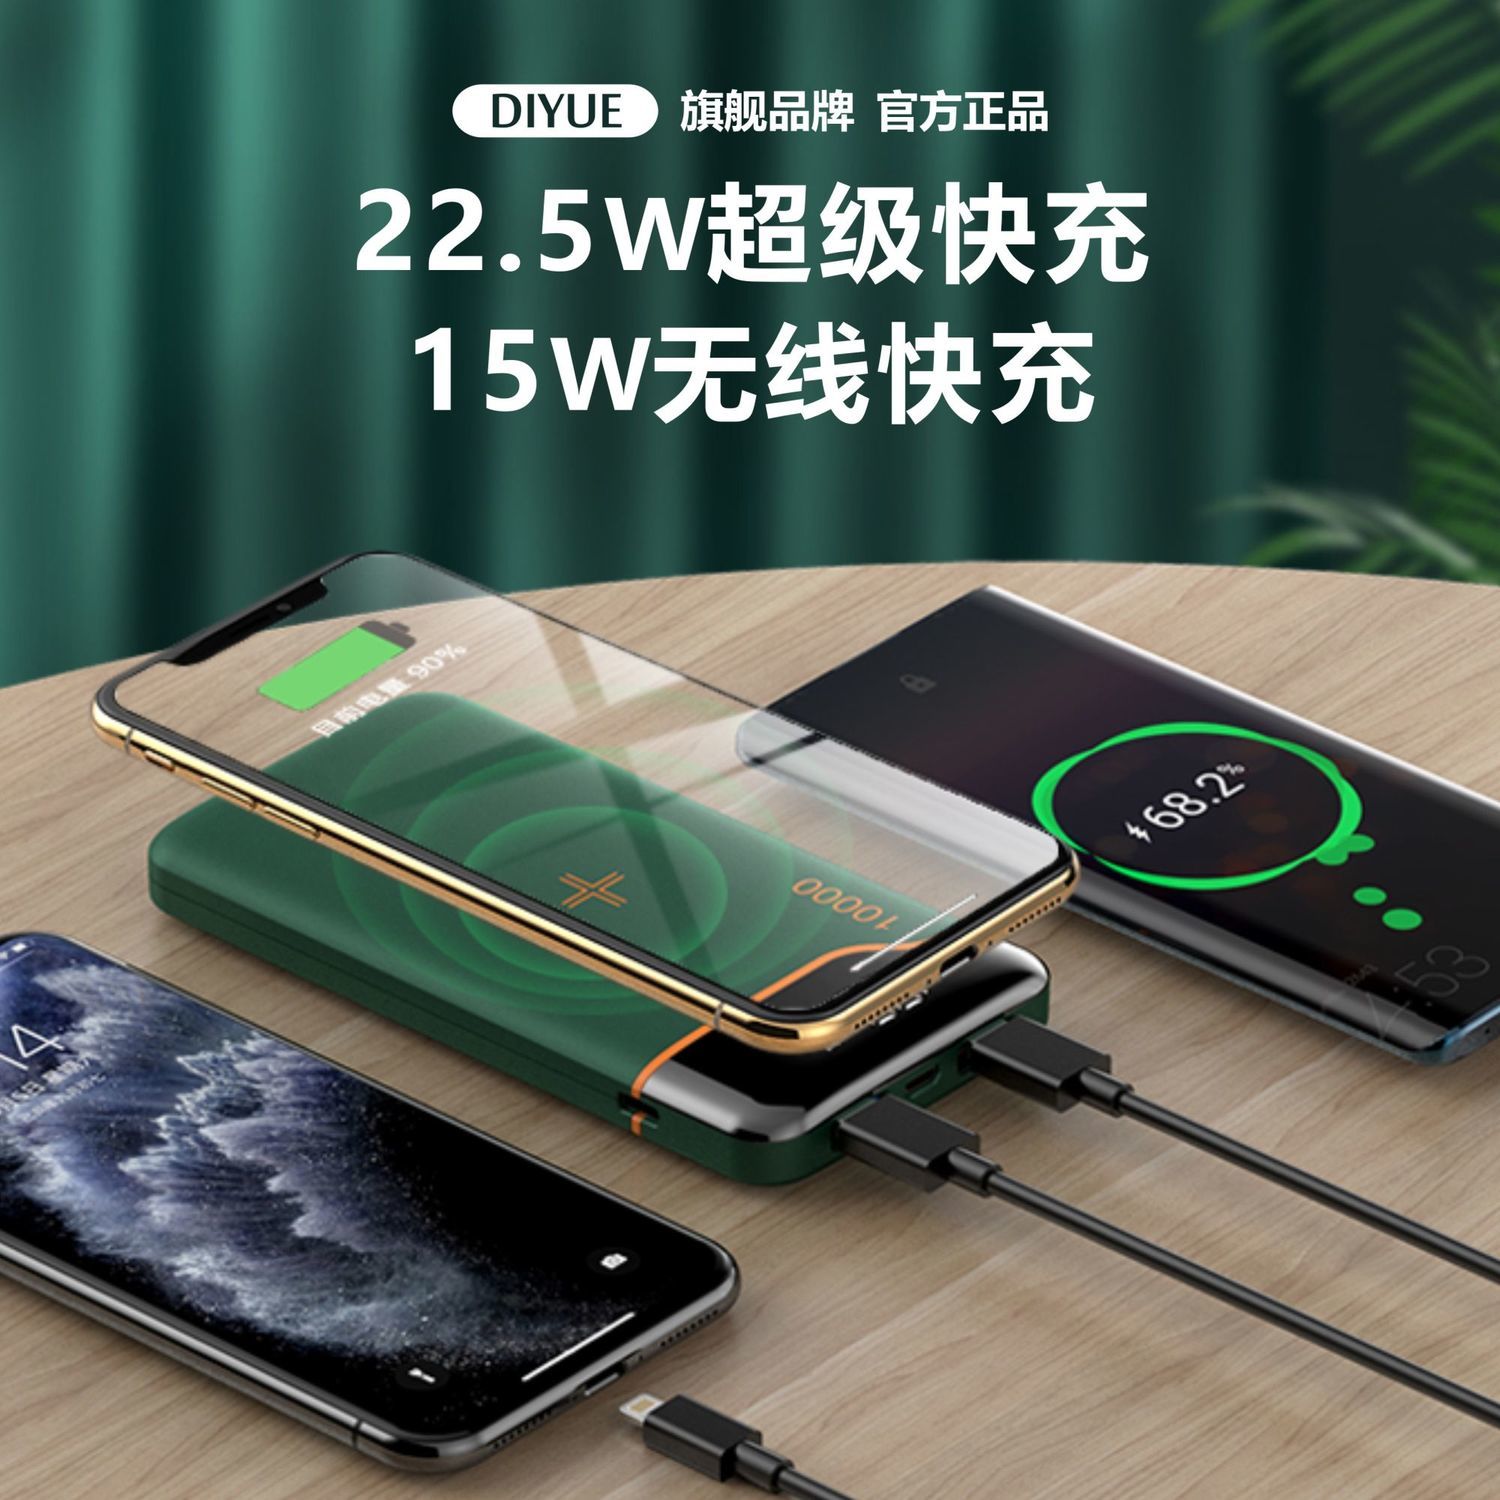 15W wireless charging treasure 20000 mA 22.5W Super fast charge Suitable for Apple 12 Huawei mobile power